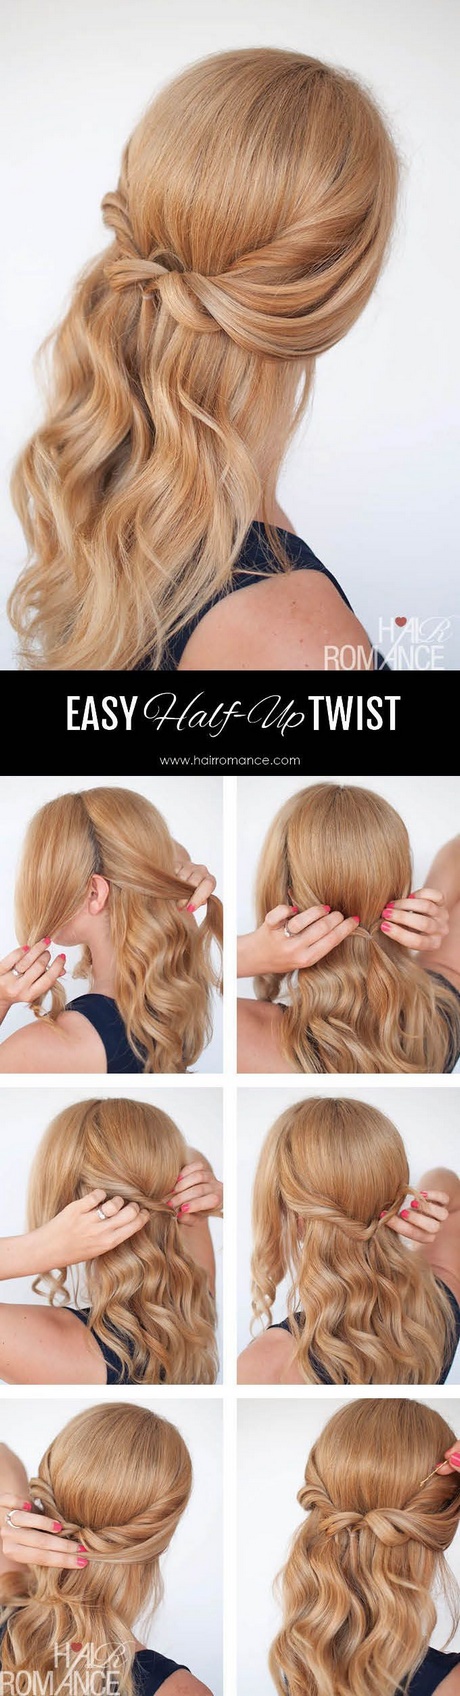 Quick easy cute hairstyles quick-easy-cute-hairstyles-13_10